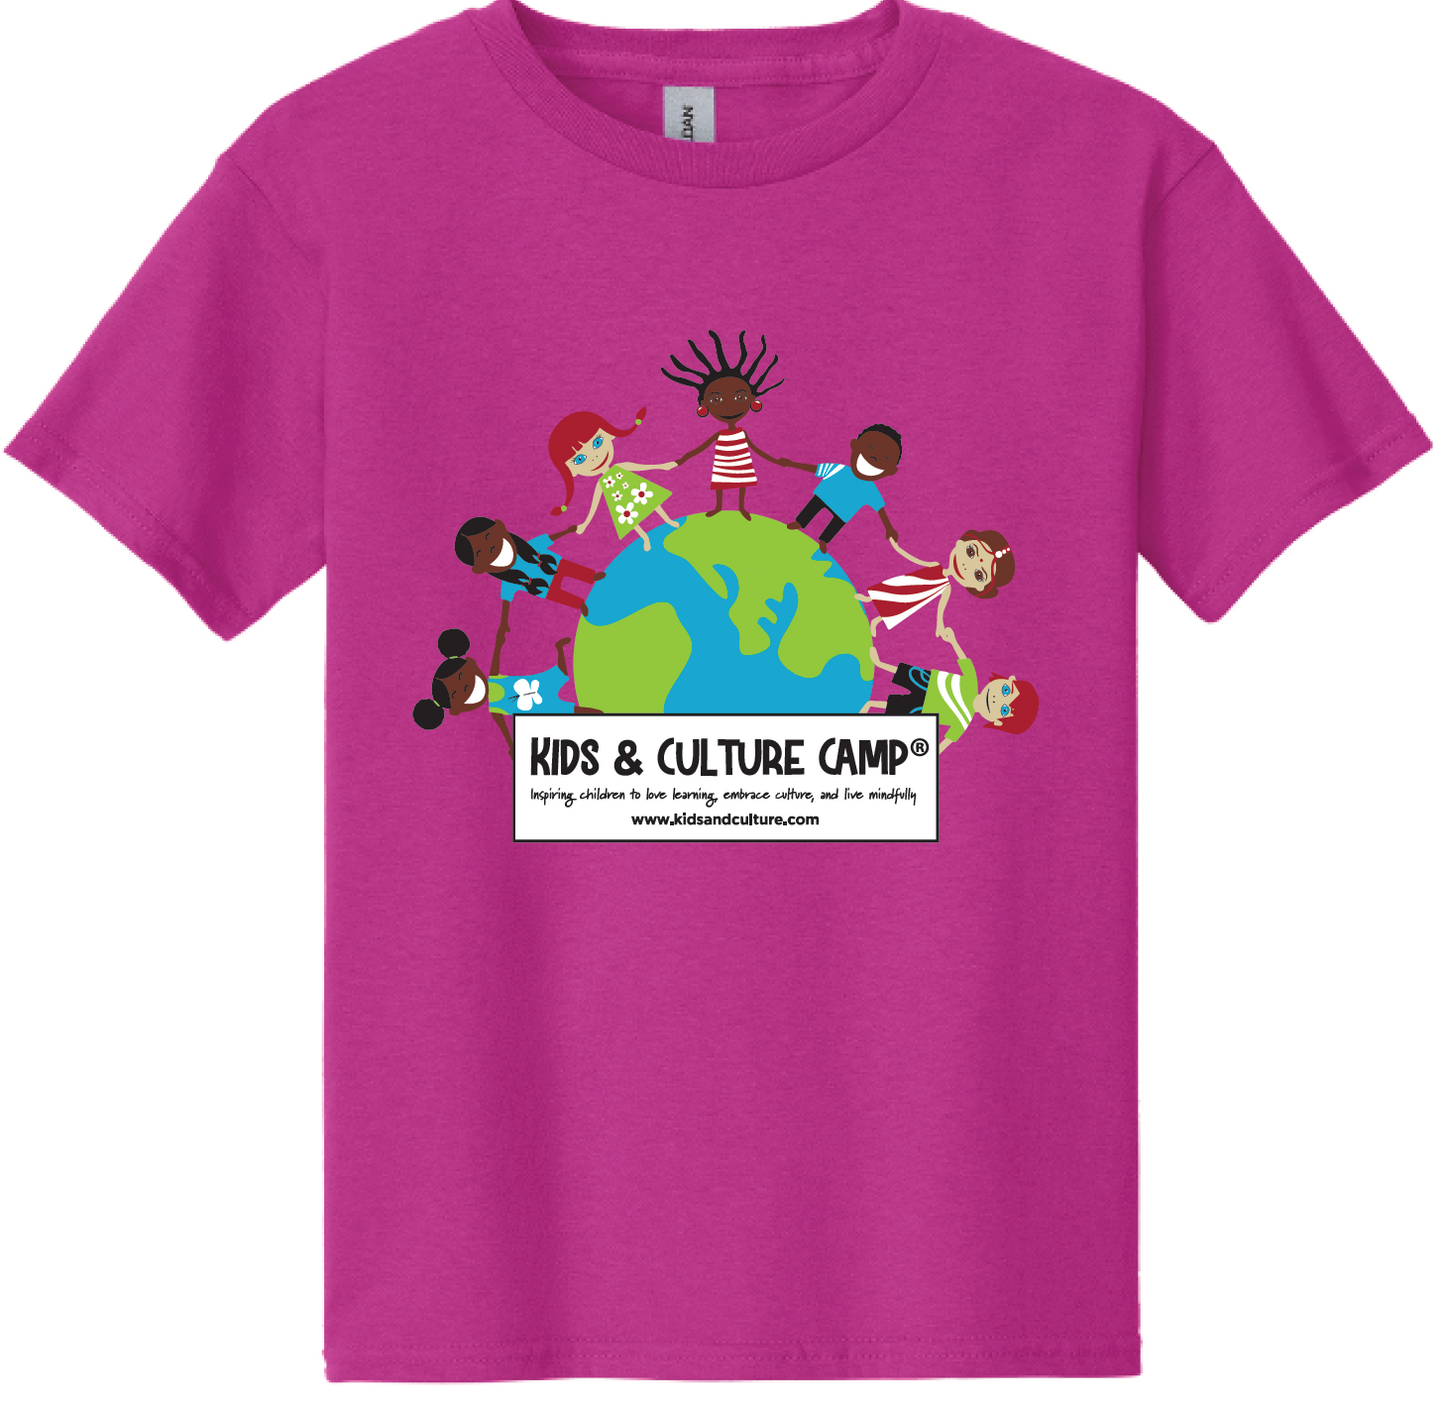 Heleconia pink short sleeved youth t-shirt with globe logo. Children of different ethnicities are holding hands around the globe. The words Kids & Culture Camp inspiring Children to love learning, embrace culture, and live mindfully are underneath the globe. Kids & Culture Camp's web address is underneath the camp name www.kidsandculture.com.